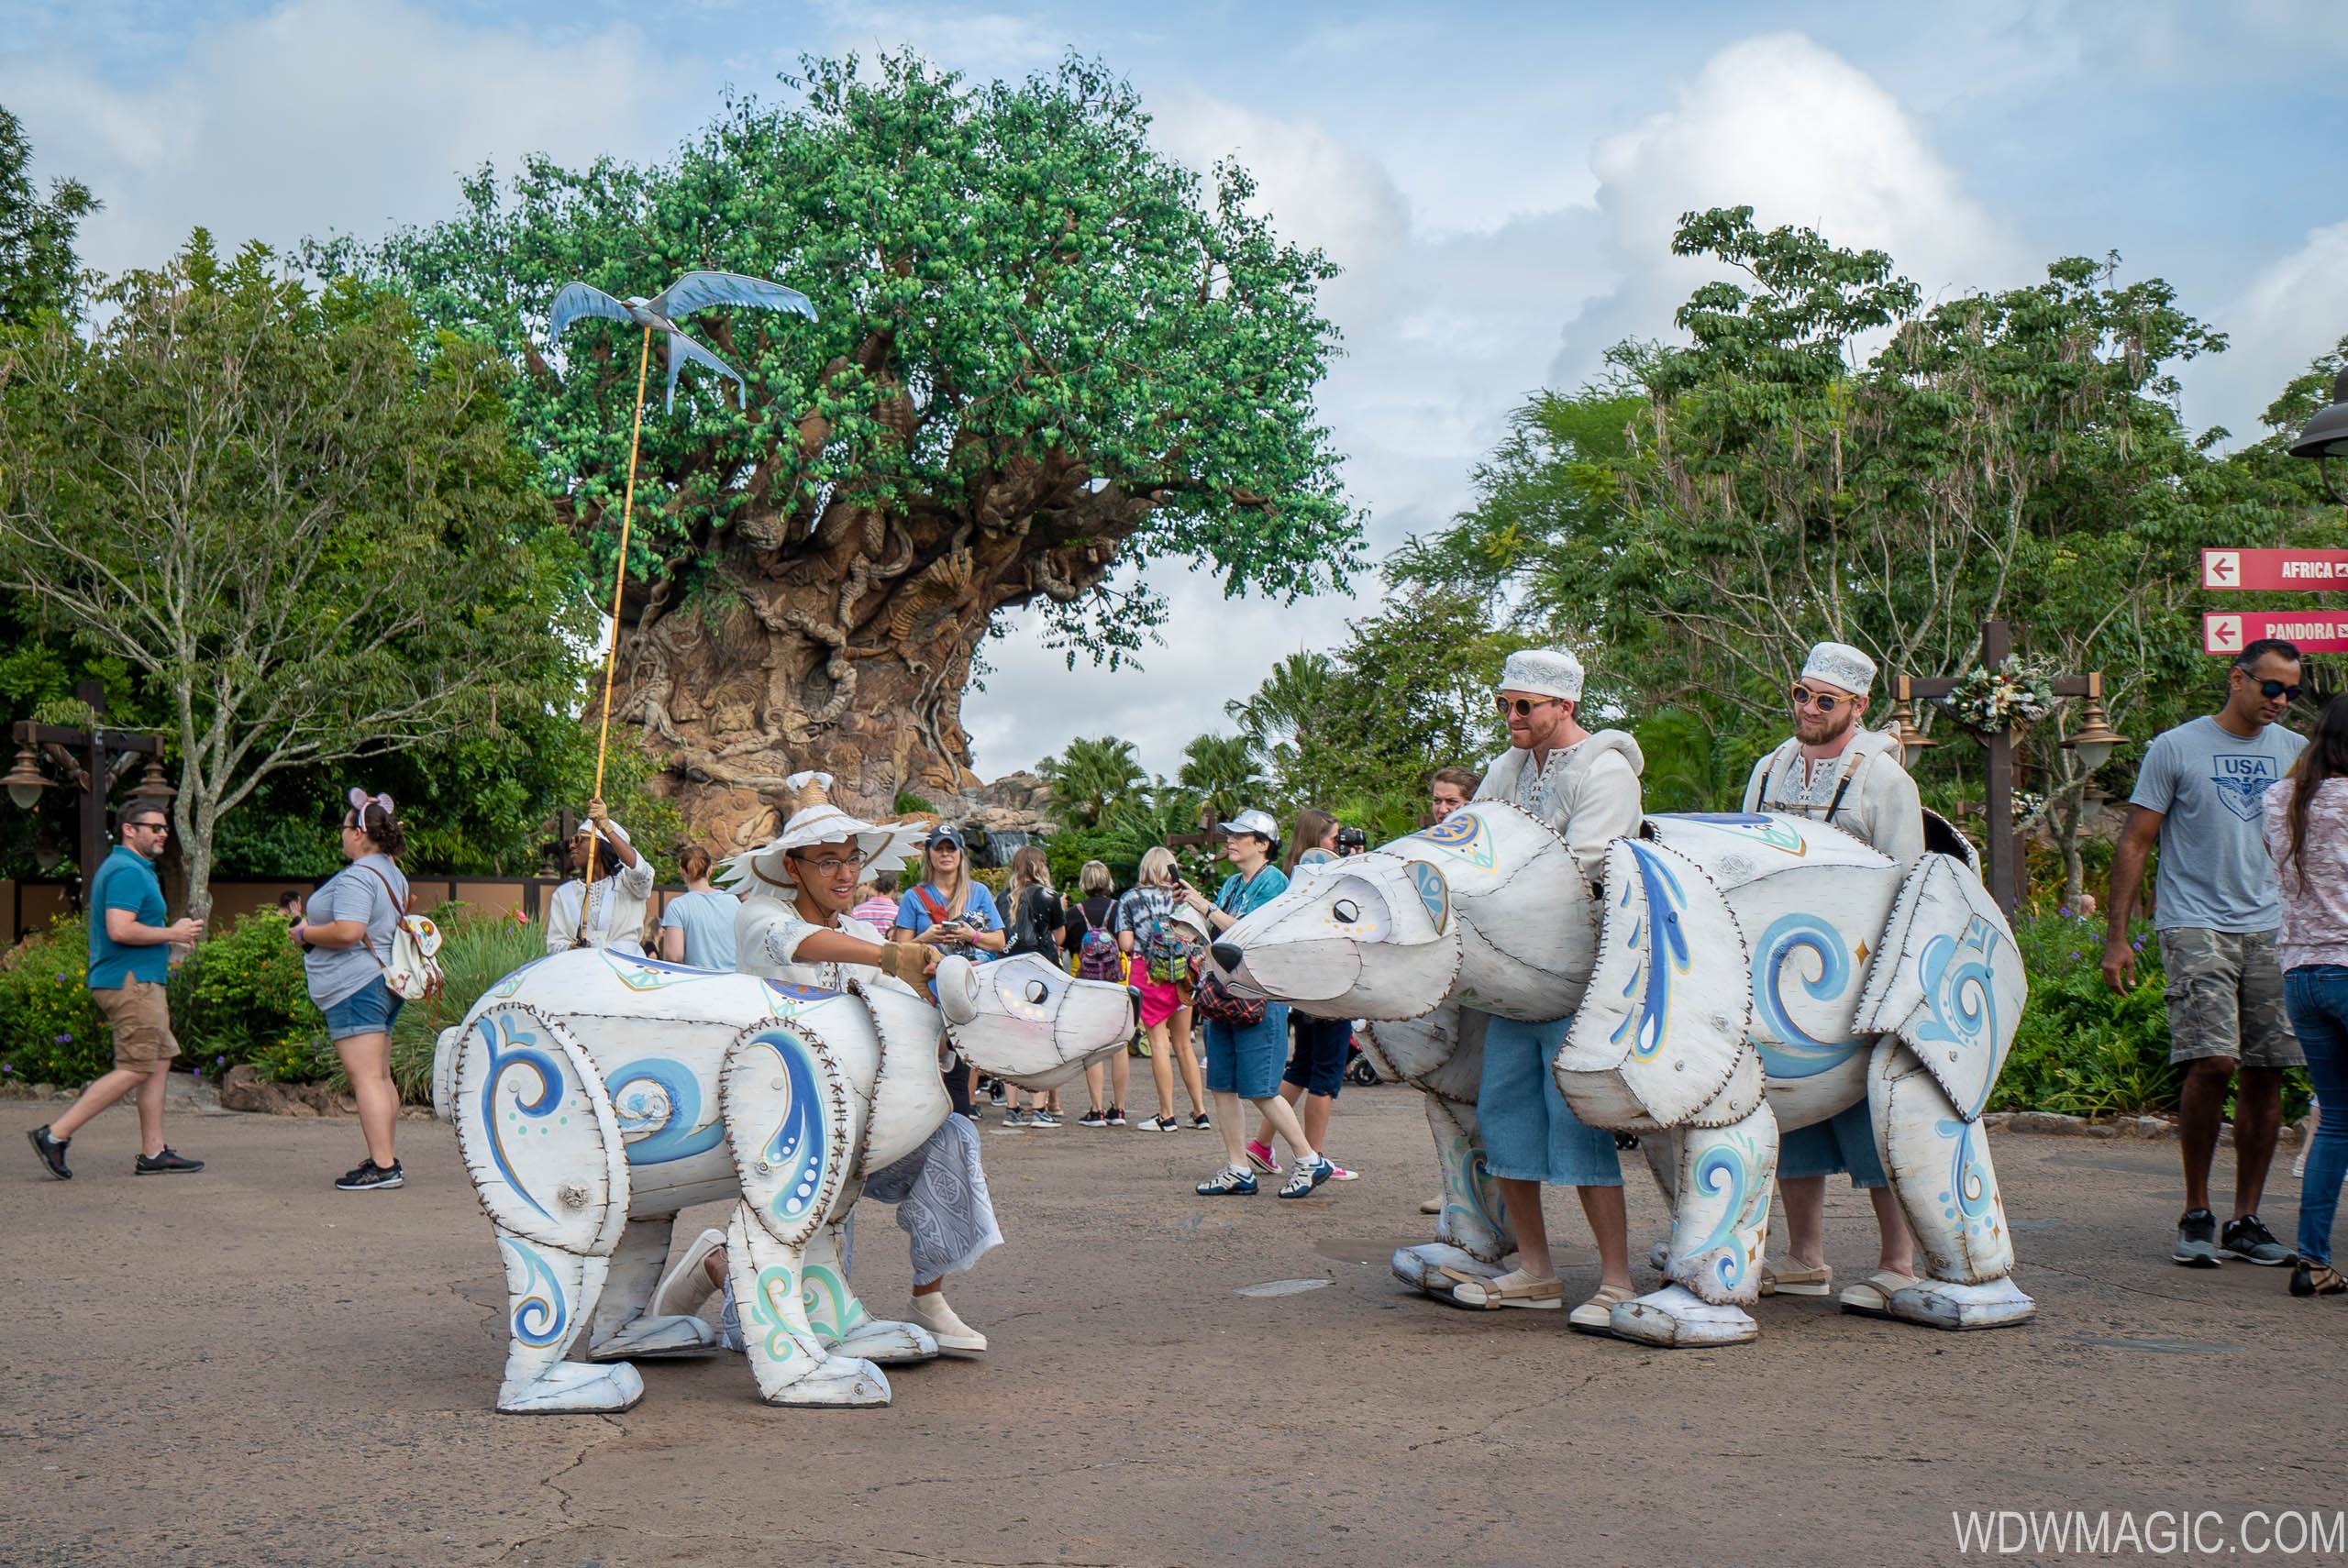 PHOTOS - Merry Menagerie welcomes guests to the holidays at Disney's Animal Kingdom